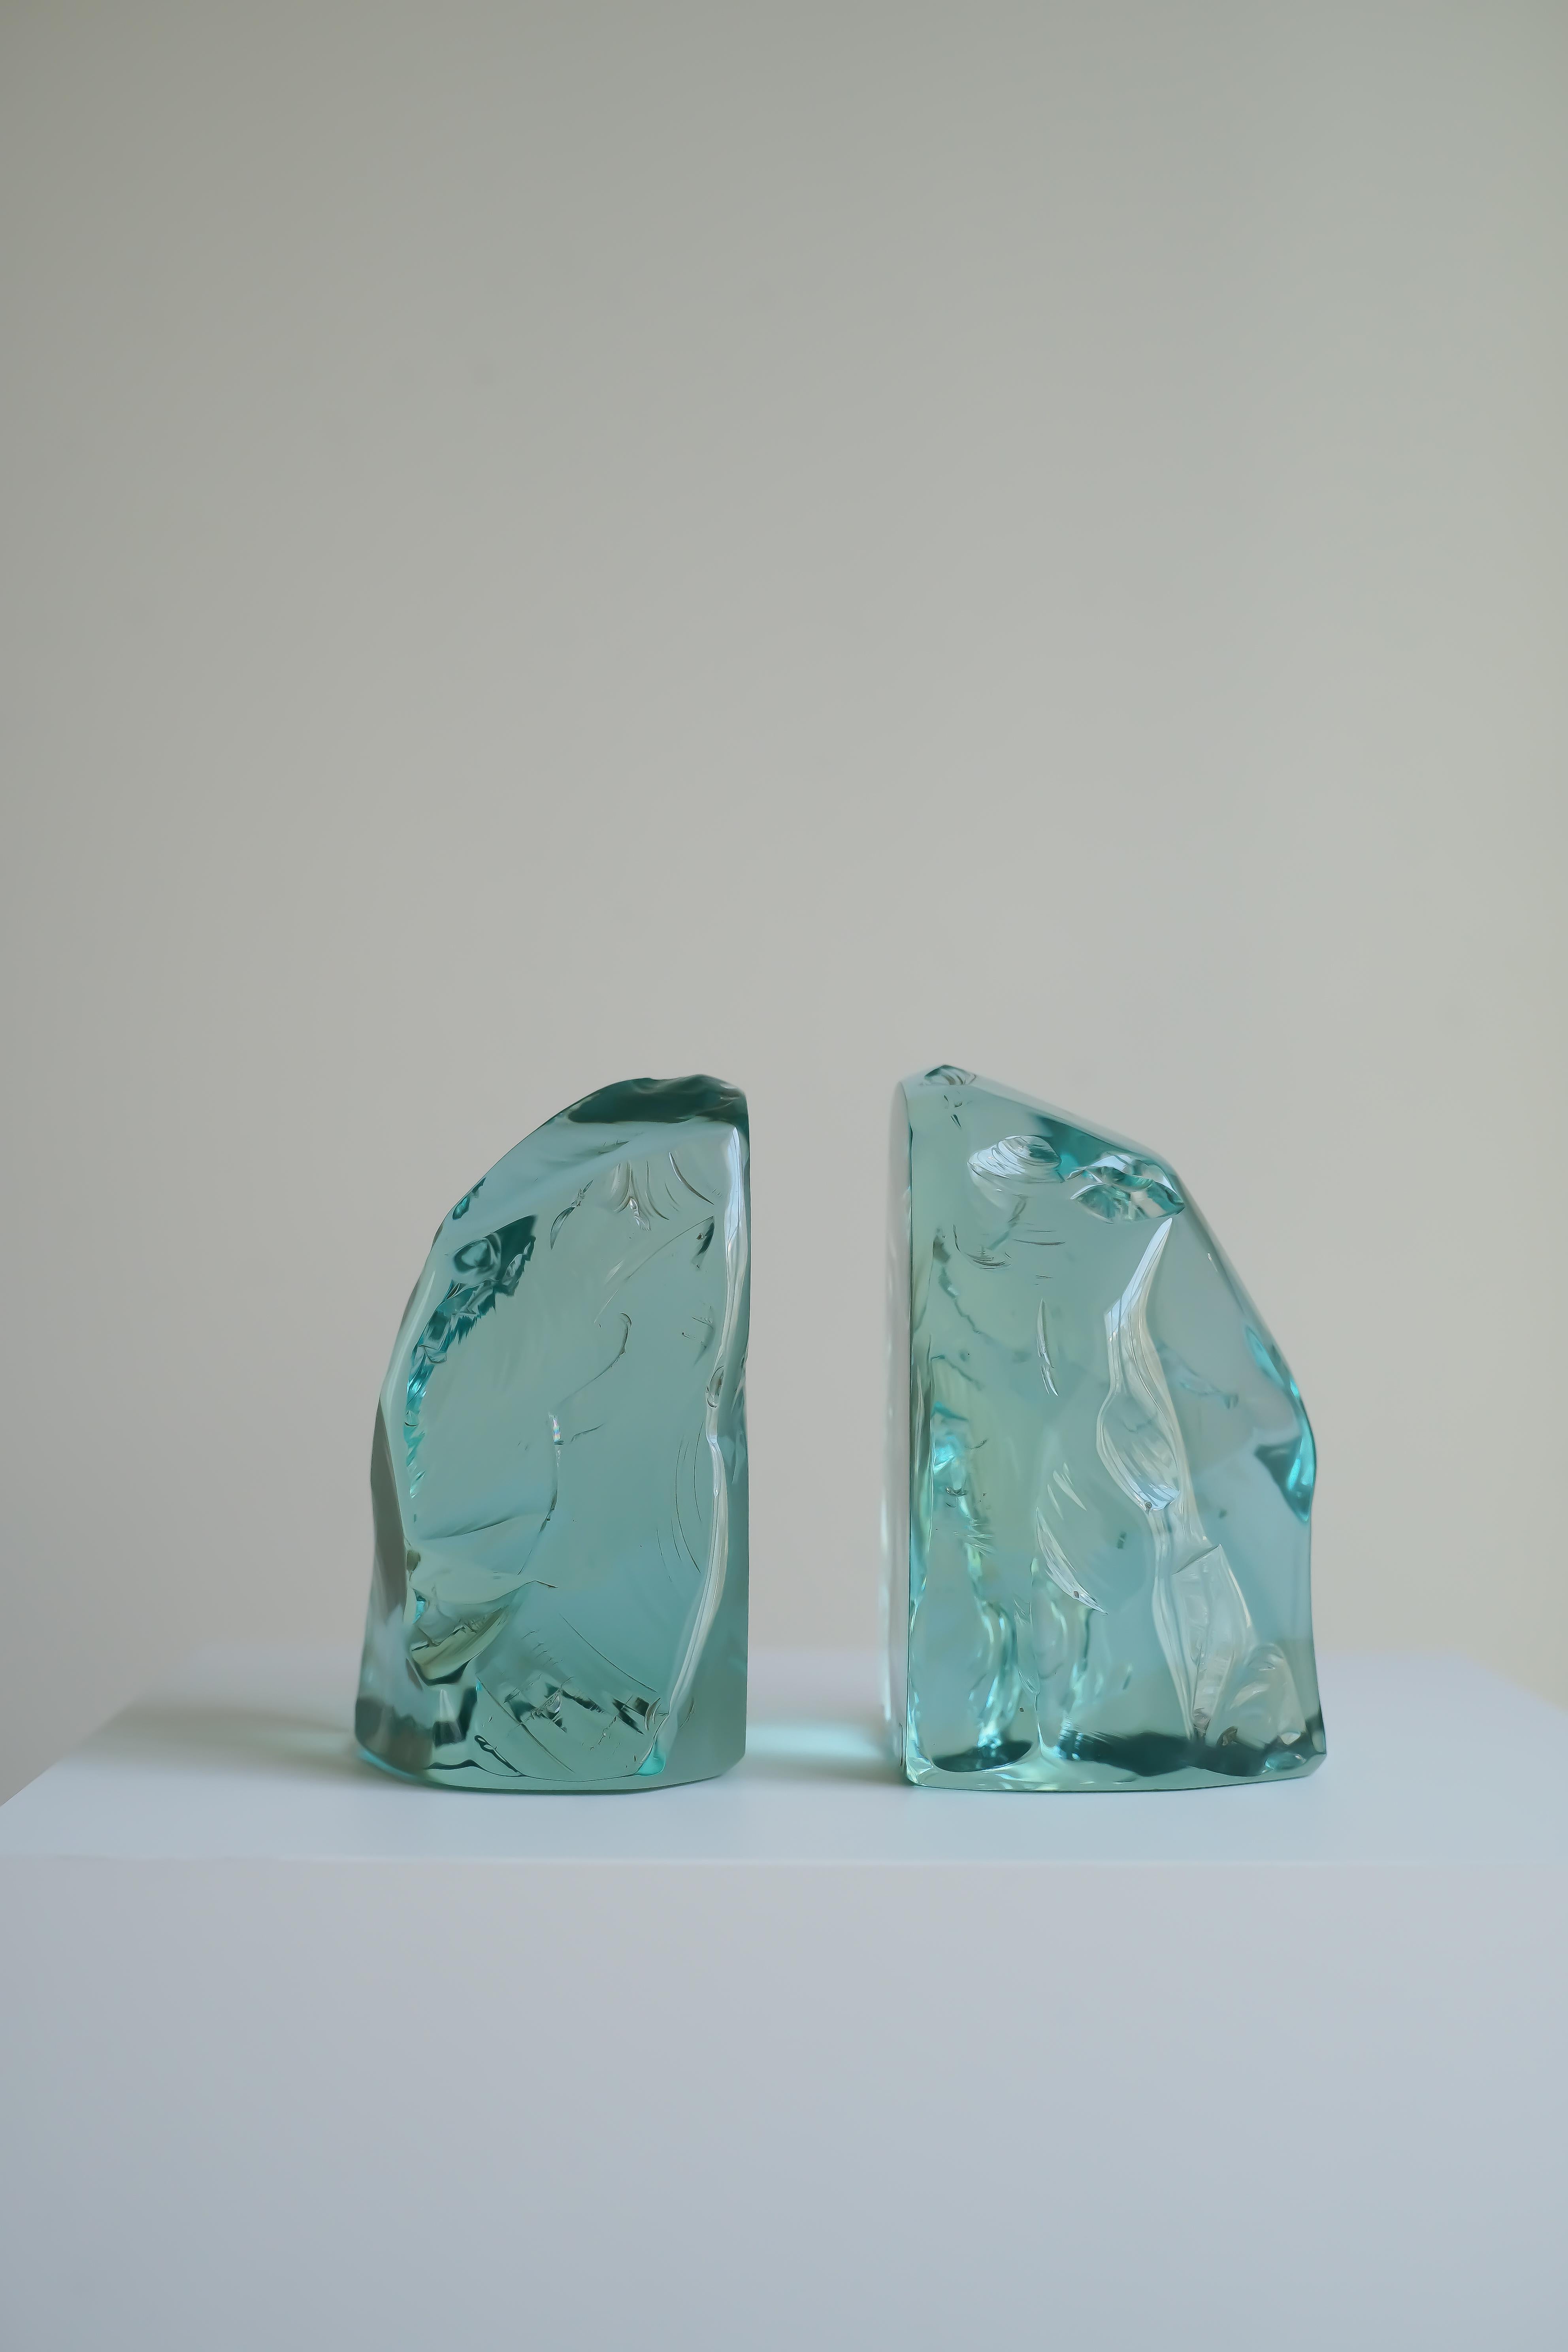 A pair of luminous turquoise crystal 1977 bookends by Max Ingrand for Fontana Arte, c.1960s. The maker’s mark is visible at the base of one of the bookends.

FontanaArte was founded in Milan (as Fontana Arte) iby Luigi Fontana and Giò Ponti in 1932.